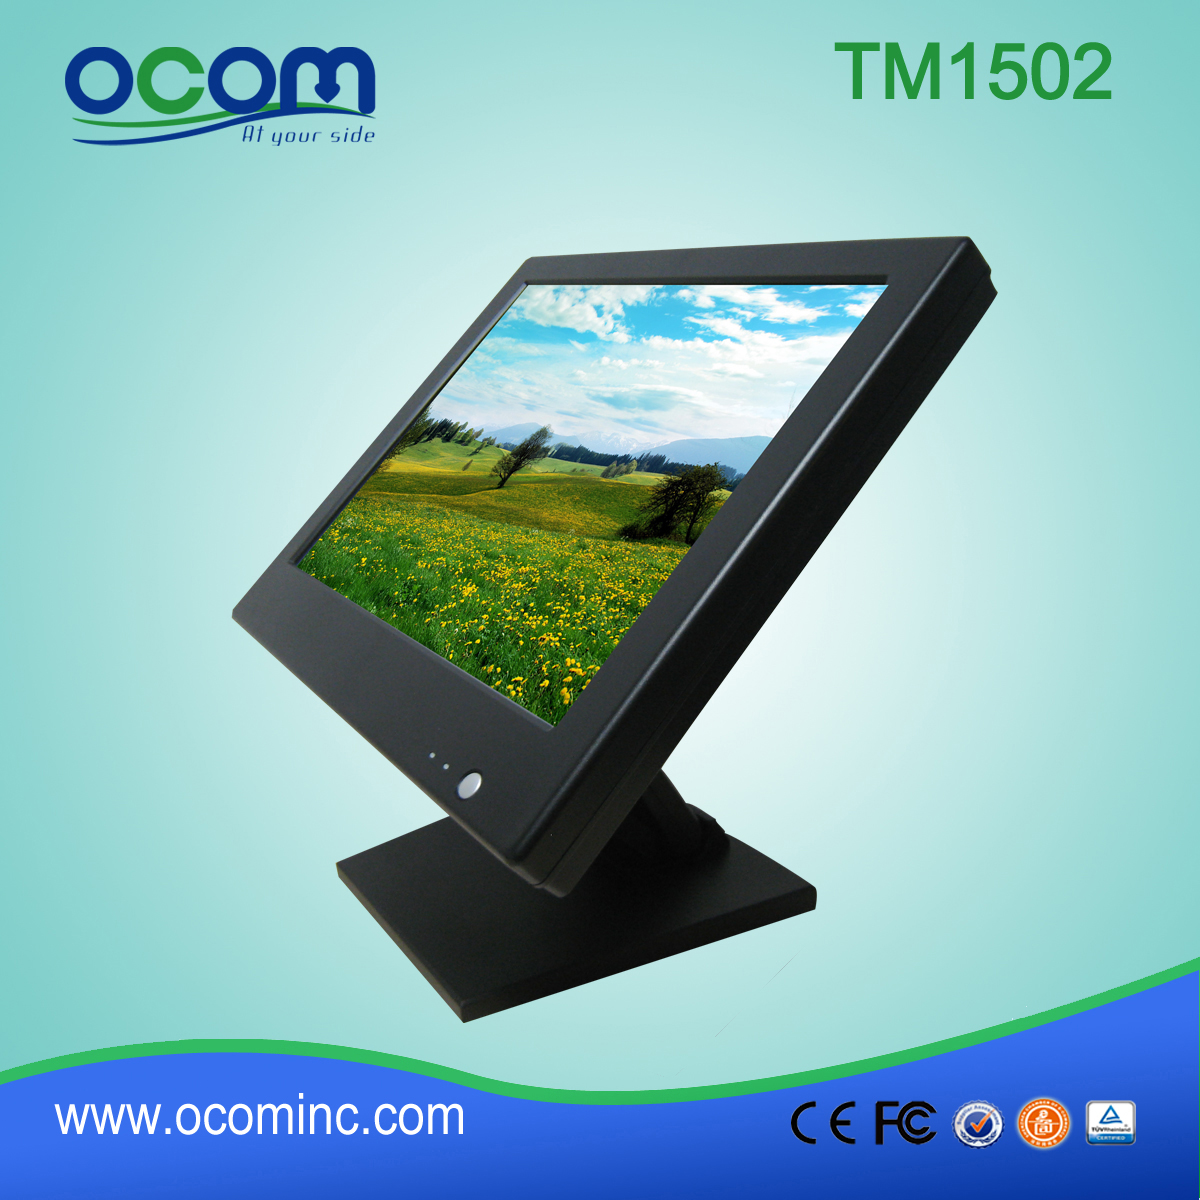 TM1502 15 inch Touch Screen Monitor